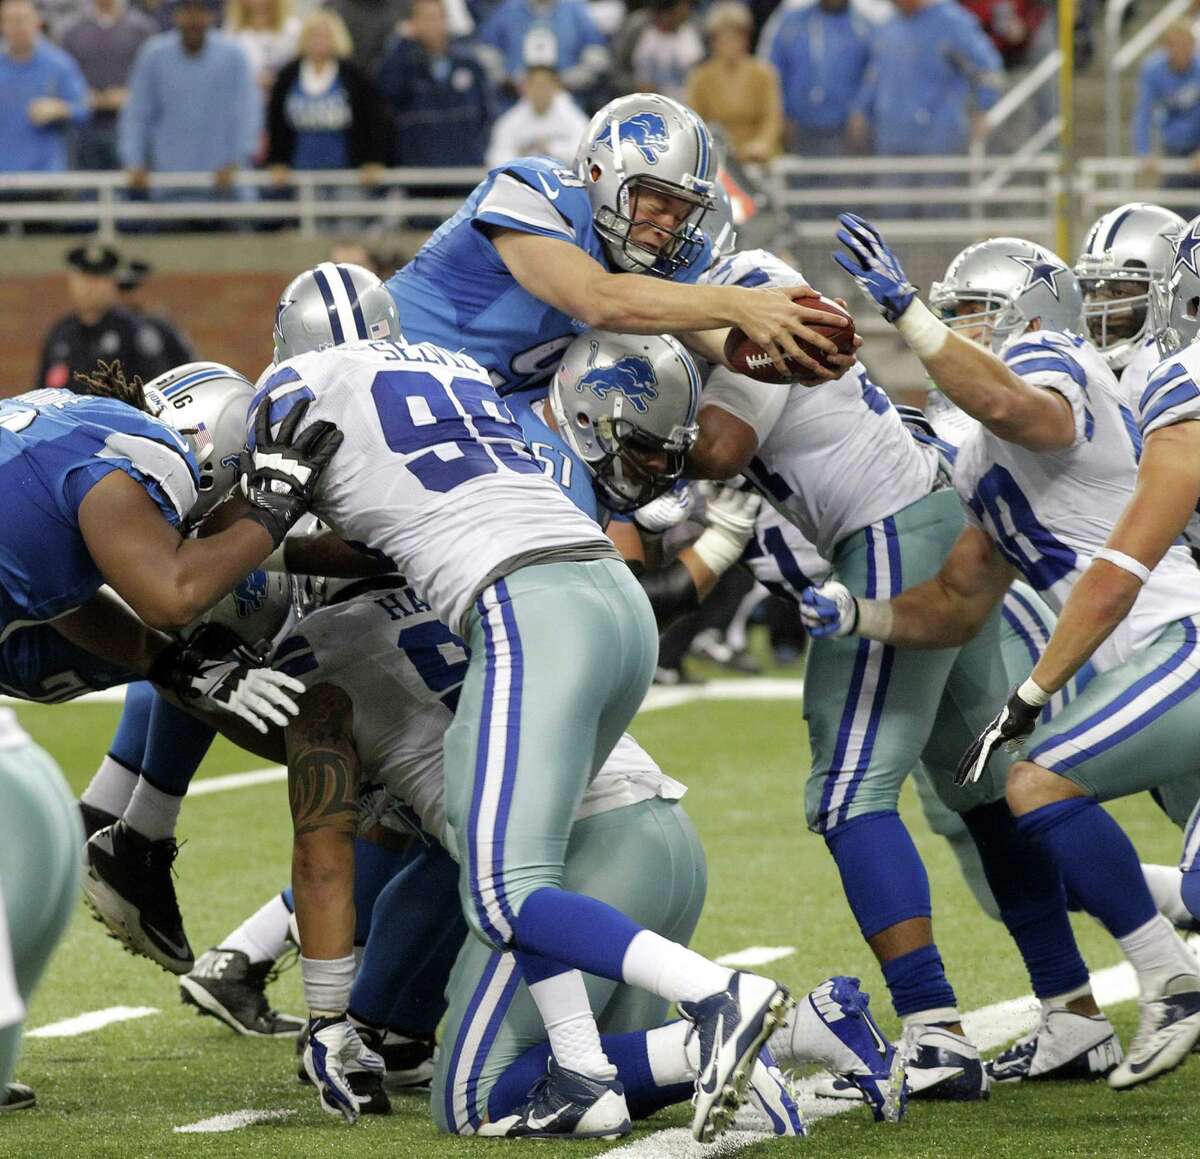 Detroit Lions quarterback Matthew Stafford scores a touchdown against the Dallas Cowboys in the fourth quarter at Ford Field in Detroit, Michigan, on Sunday, October 27, 2013, (Rodger Mallison/Fort Worth Star-Telegram/MCT)